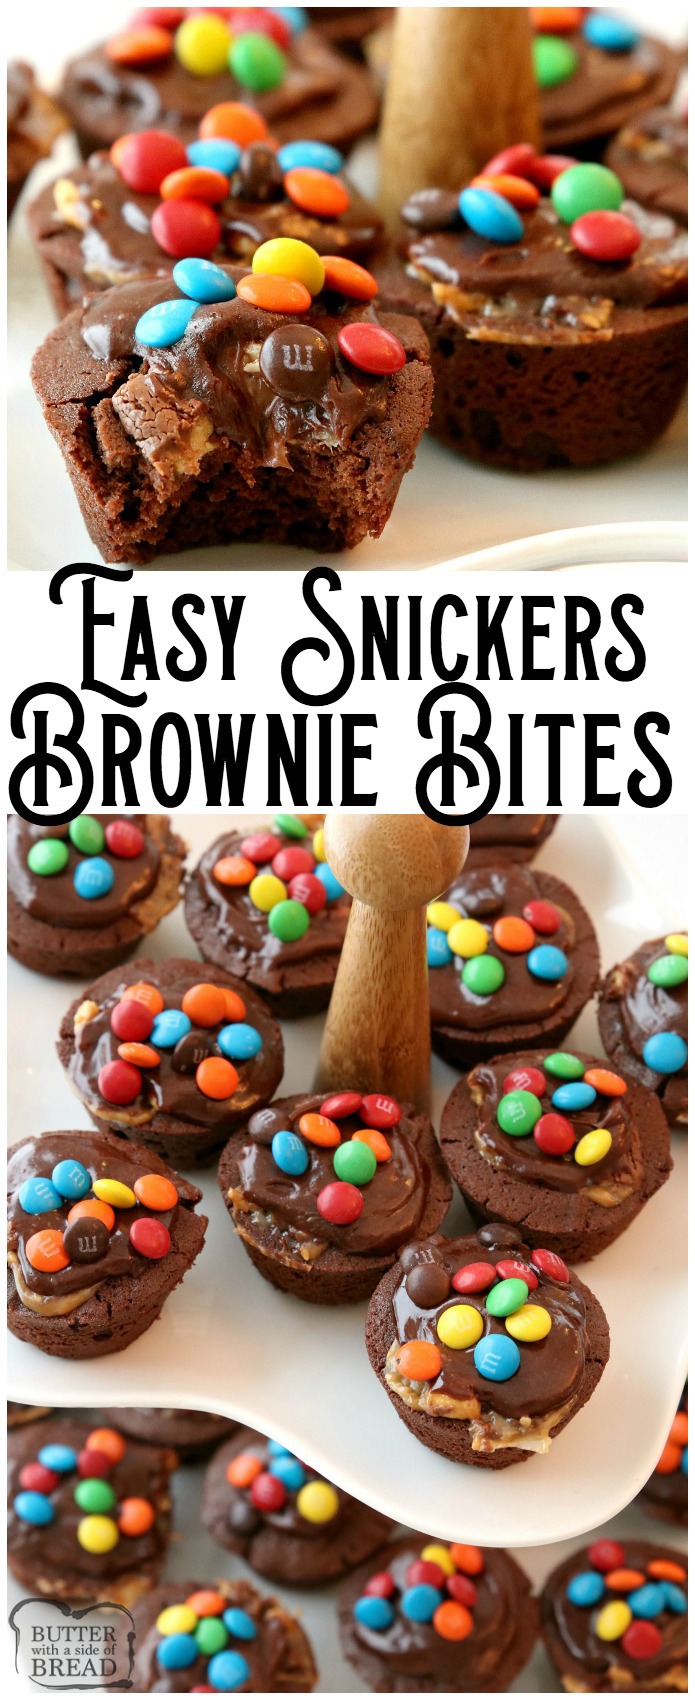 Snickers Brownie Bites made from a homemade brownie recipe then stuffed with Snickers candy and topped with chocolate frosting and chocolate candies. #brownie #Snickers #chocolate #brownies #homemade #food #dessert #recipe from BUTTER WITH A SIDE OF BREAD